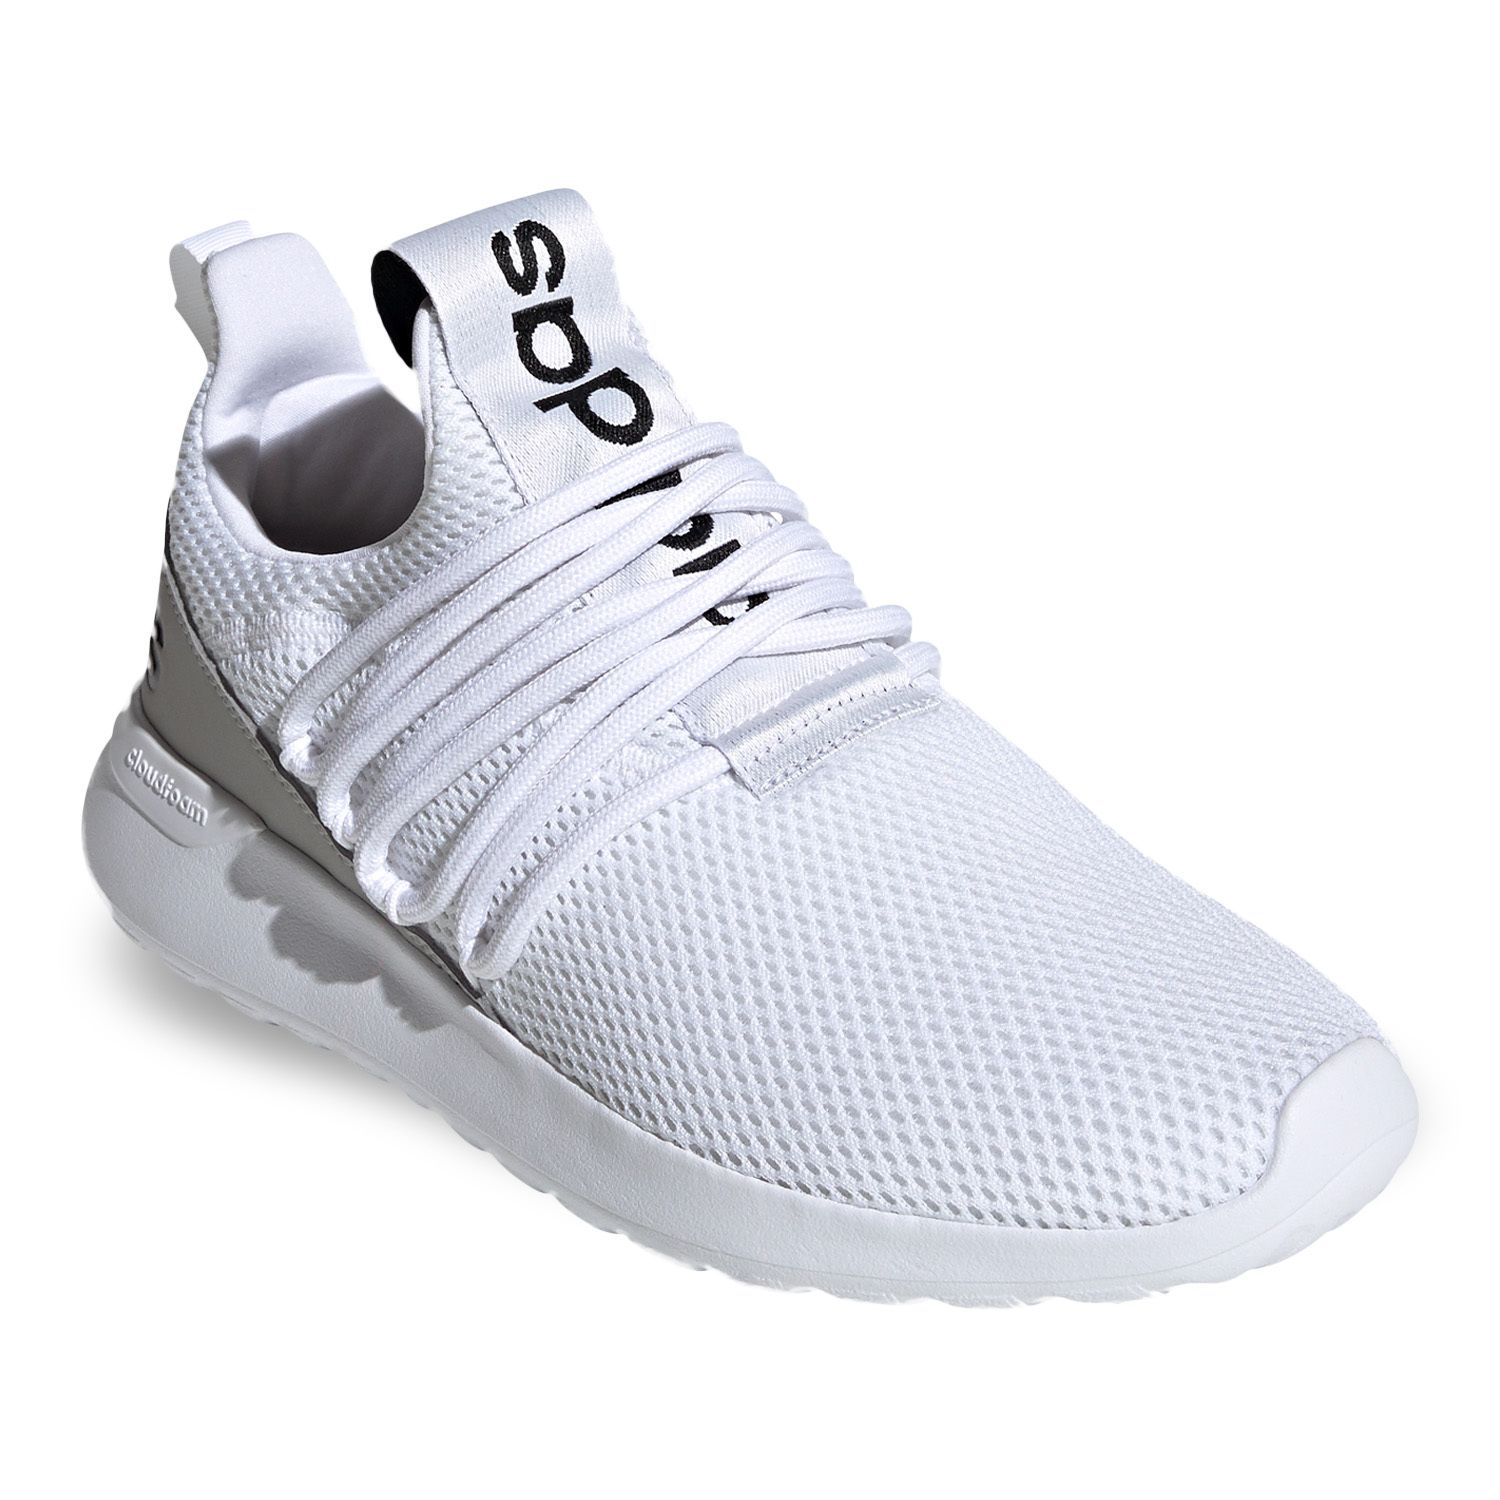 adidas mens all white shoes